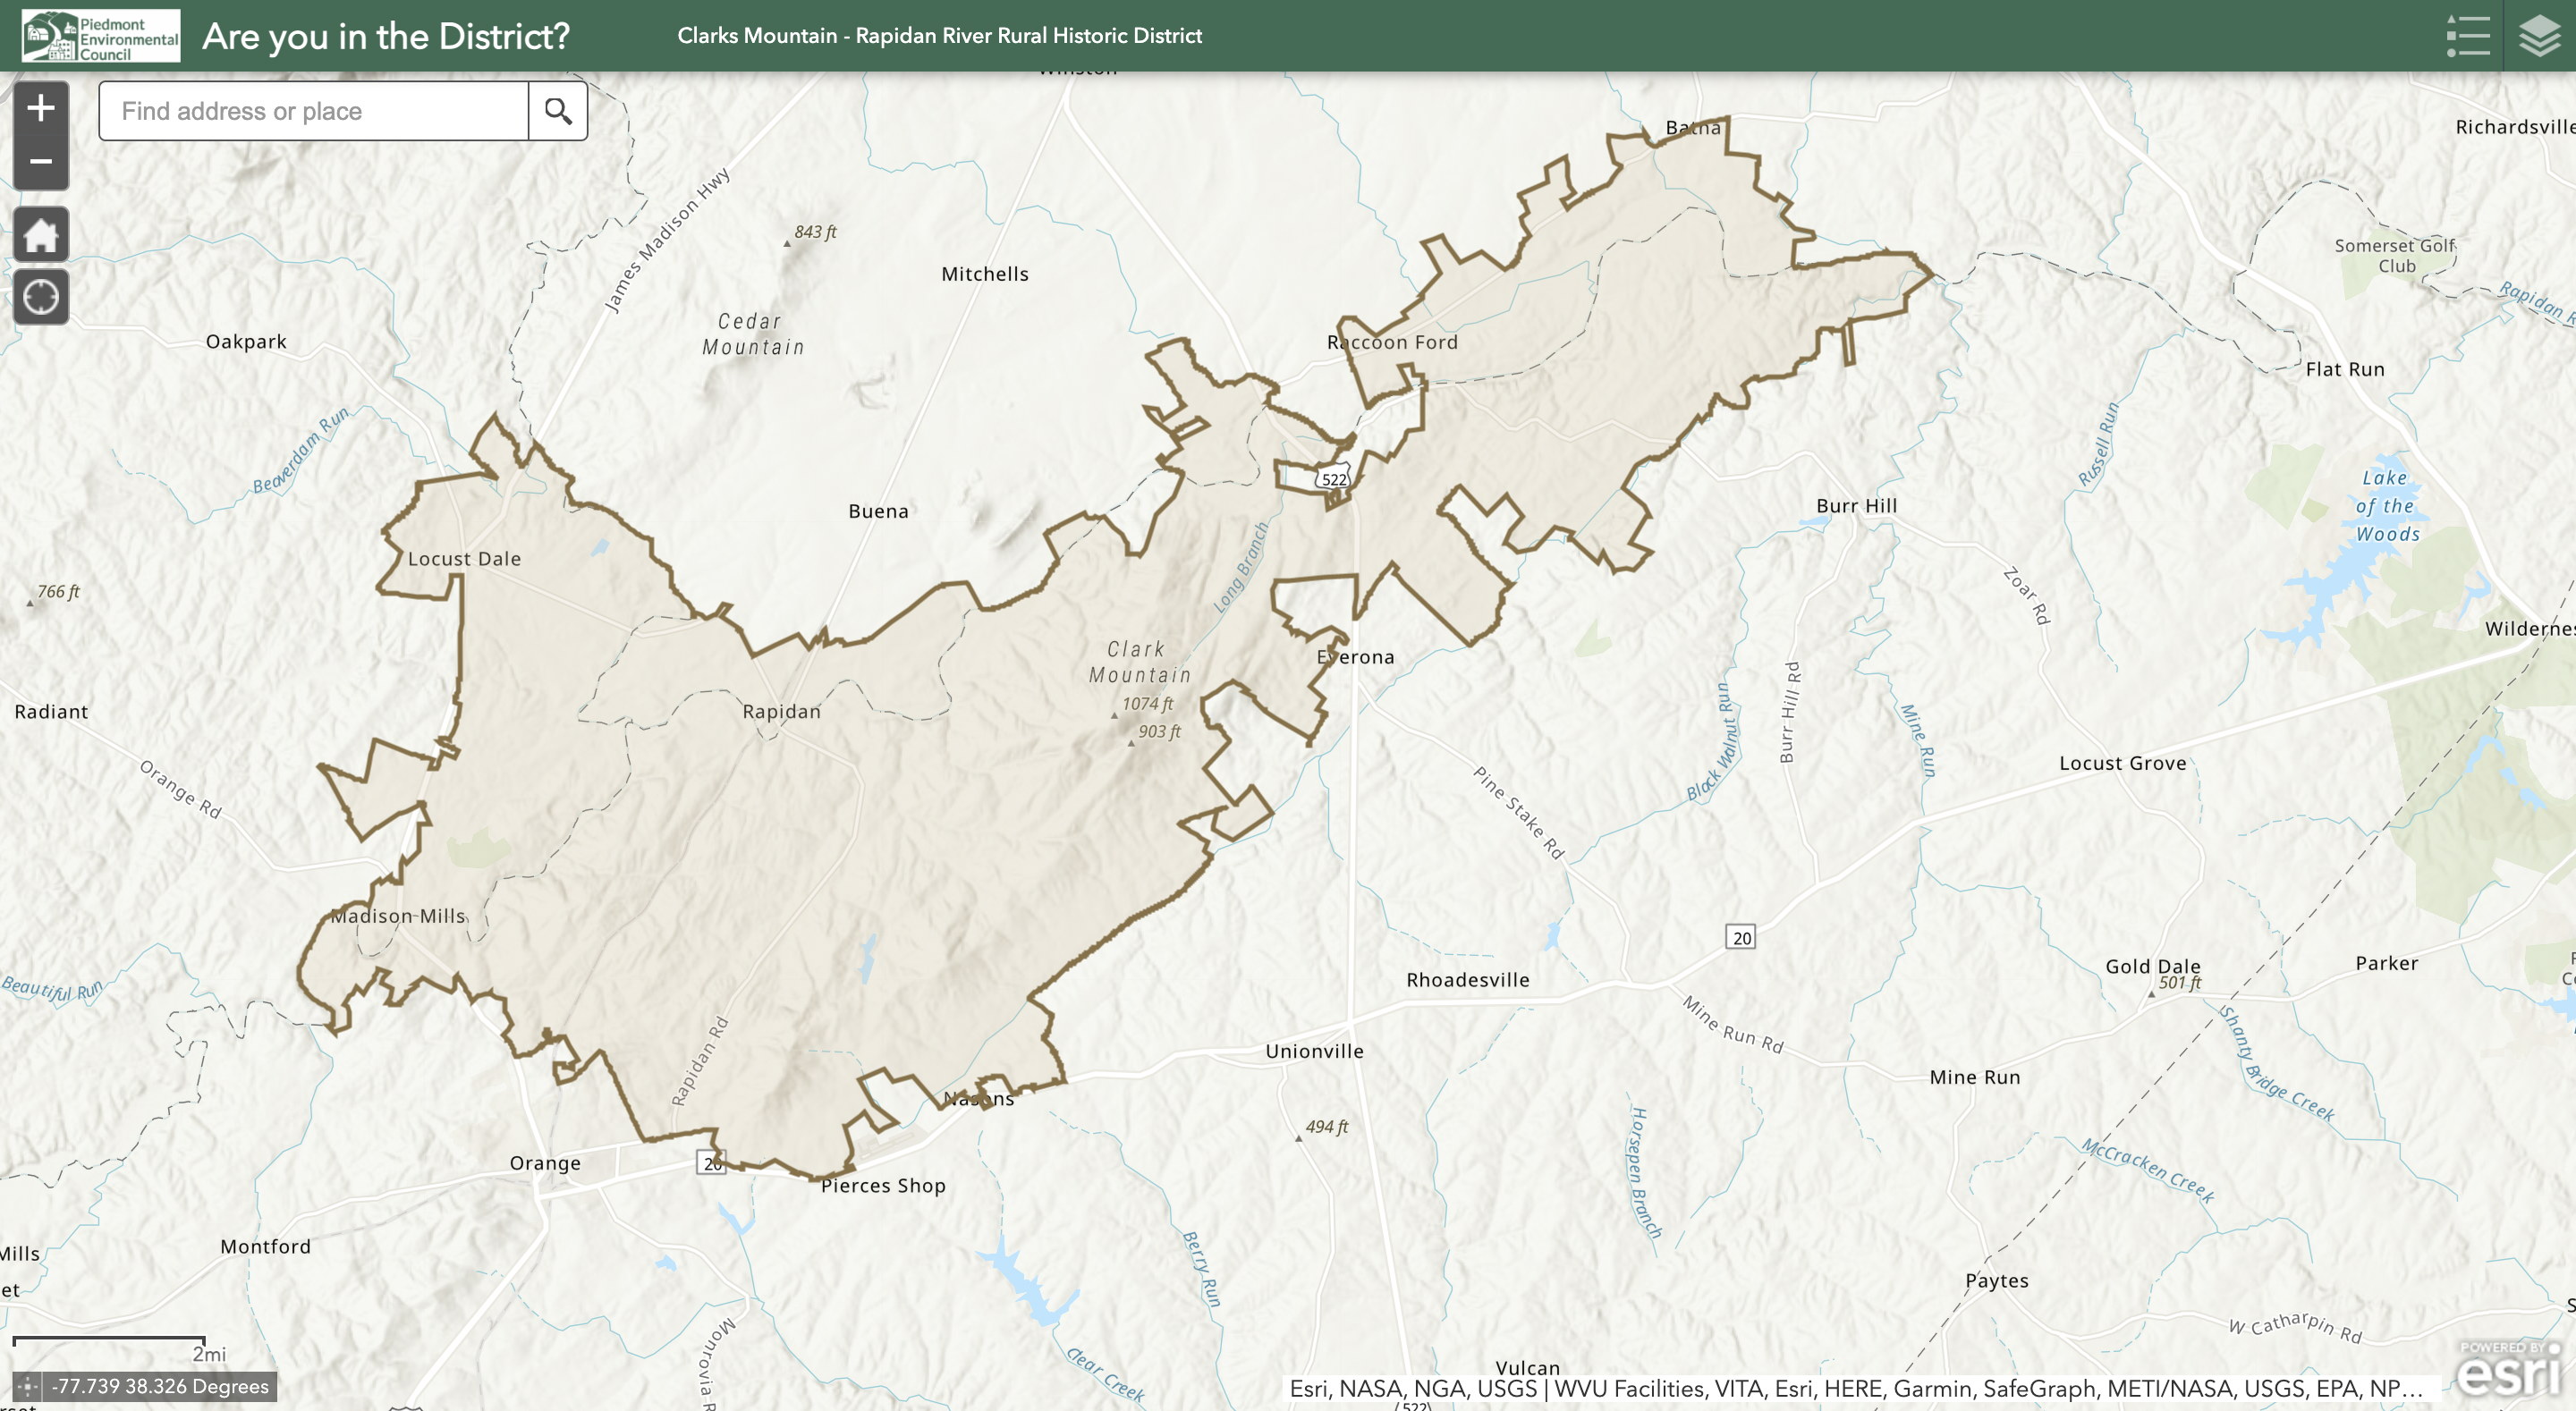 screenshot of an interactive map with the rural historic district boundary